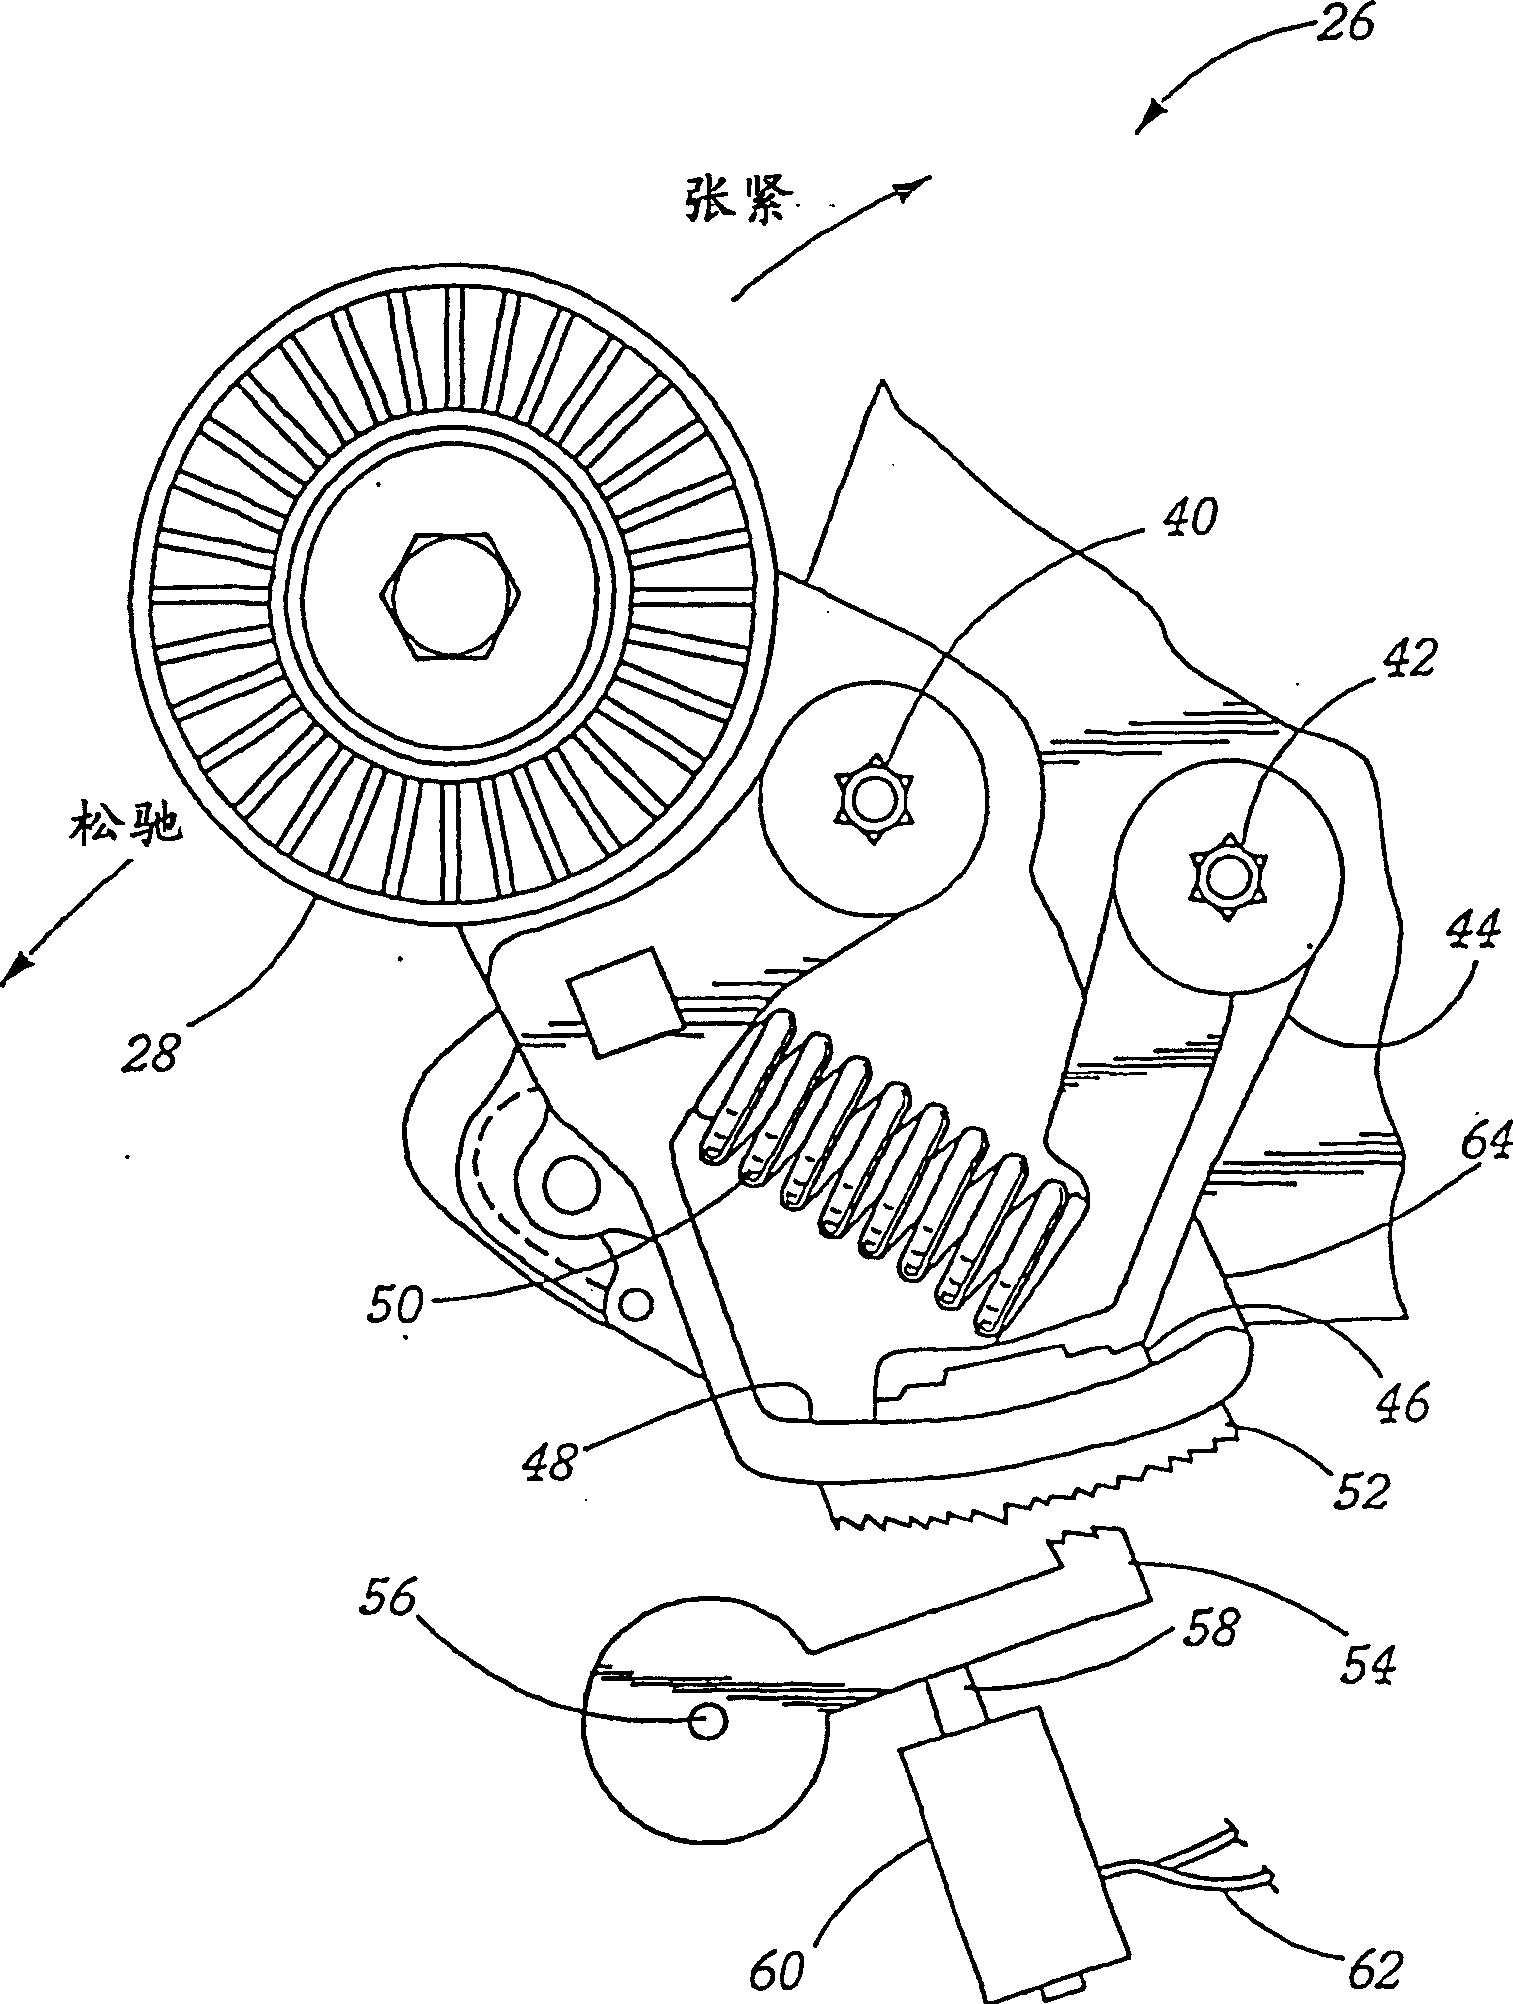 Motor/generator and accessory belt drive system